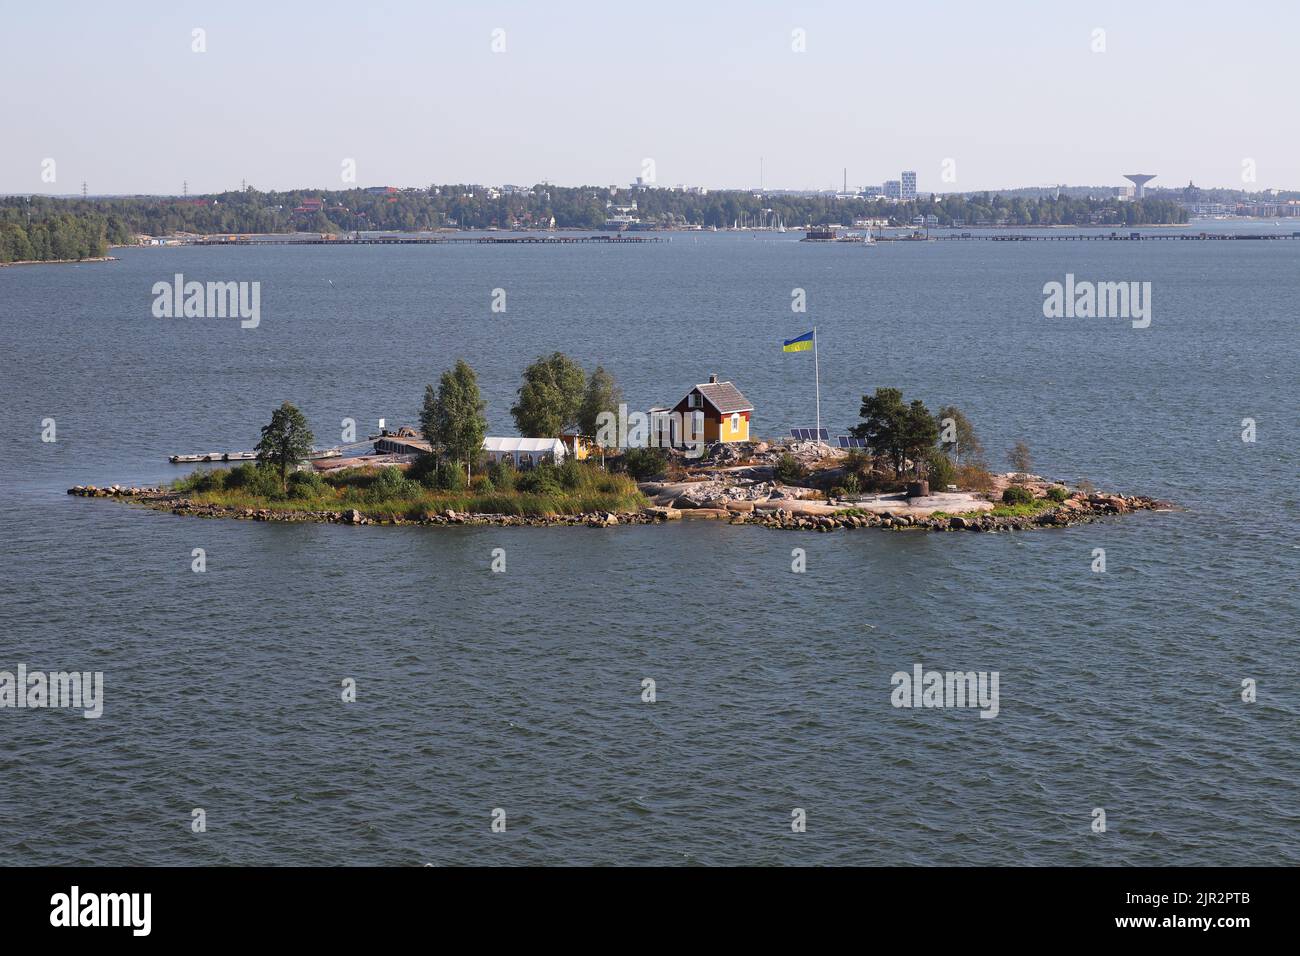 Helsinki, Finland - August 20, 2022: The Ukrainian flag raised next to a small house on a small island arriving ship in the Helsinki harbor entrance. Stock Photo